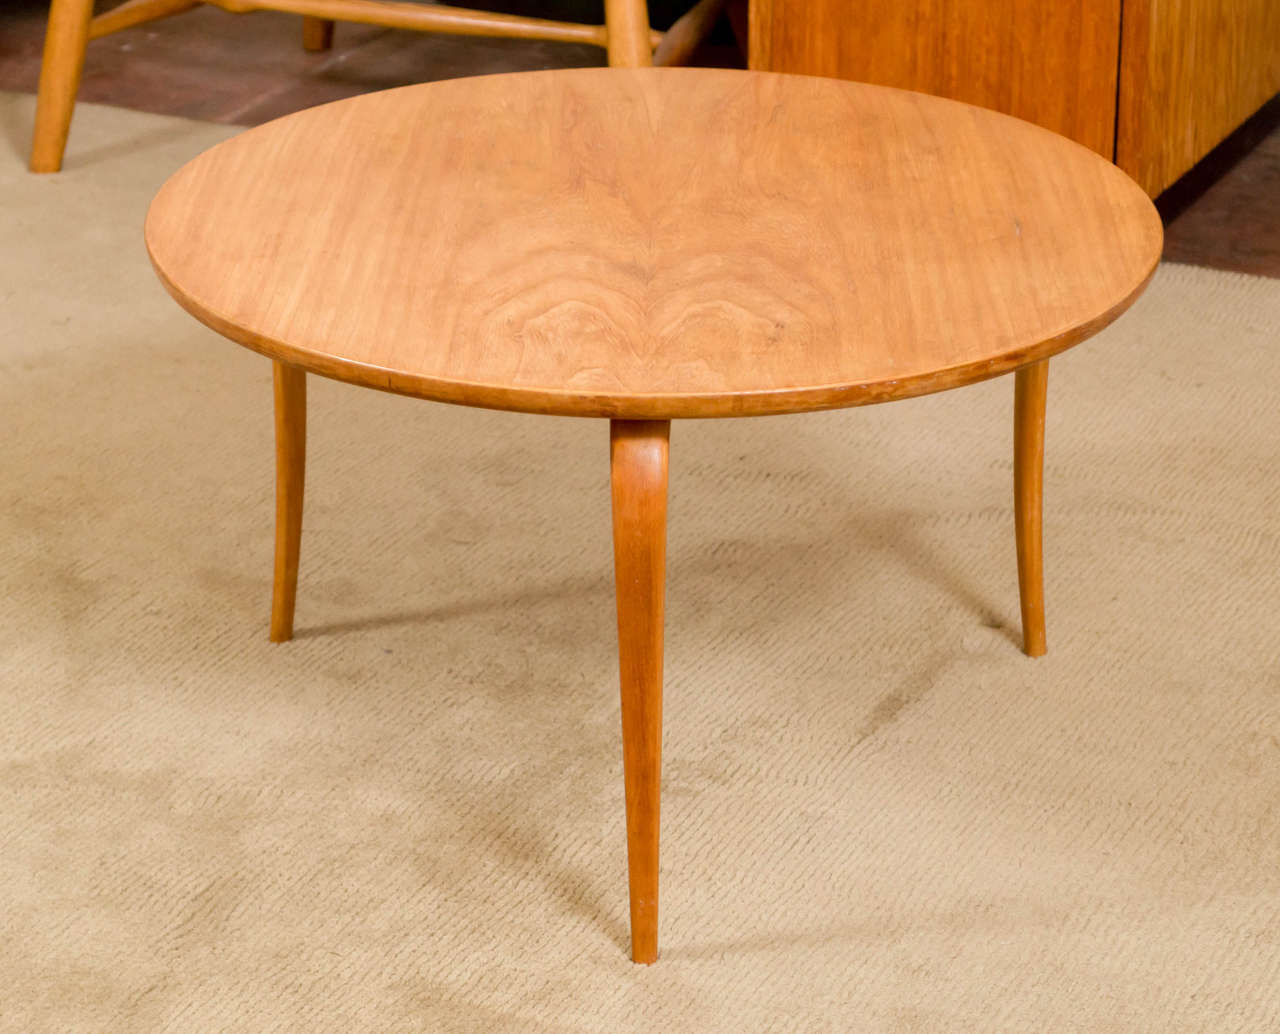 A wonderful example of Bruno Mathsson's work, this three leg side table. From Sweden. Looks to be a Birch, a veneer table top on three bent Birch legs. Very nice original, as found condition. Branded with makers marks/labels.